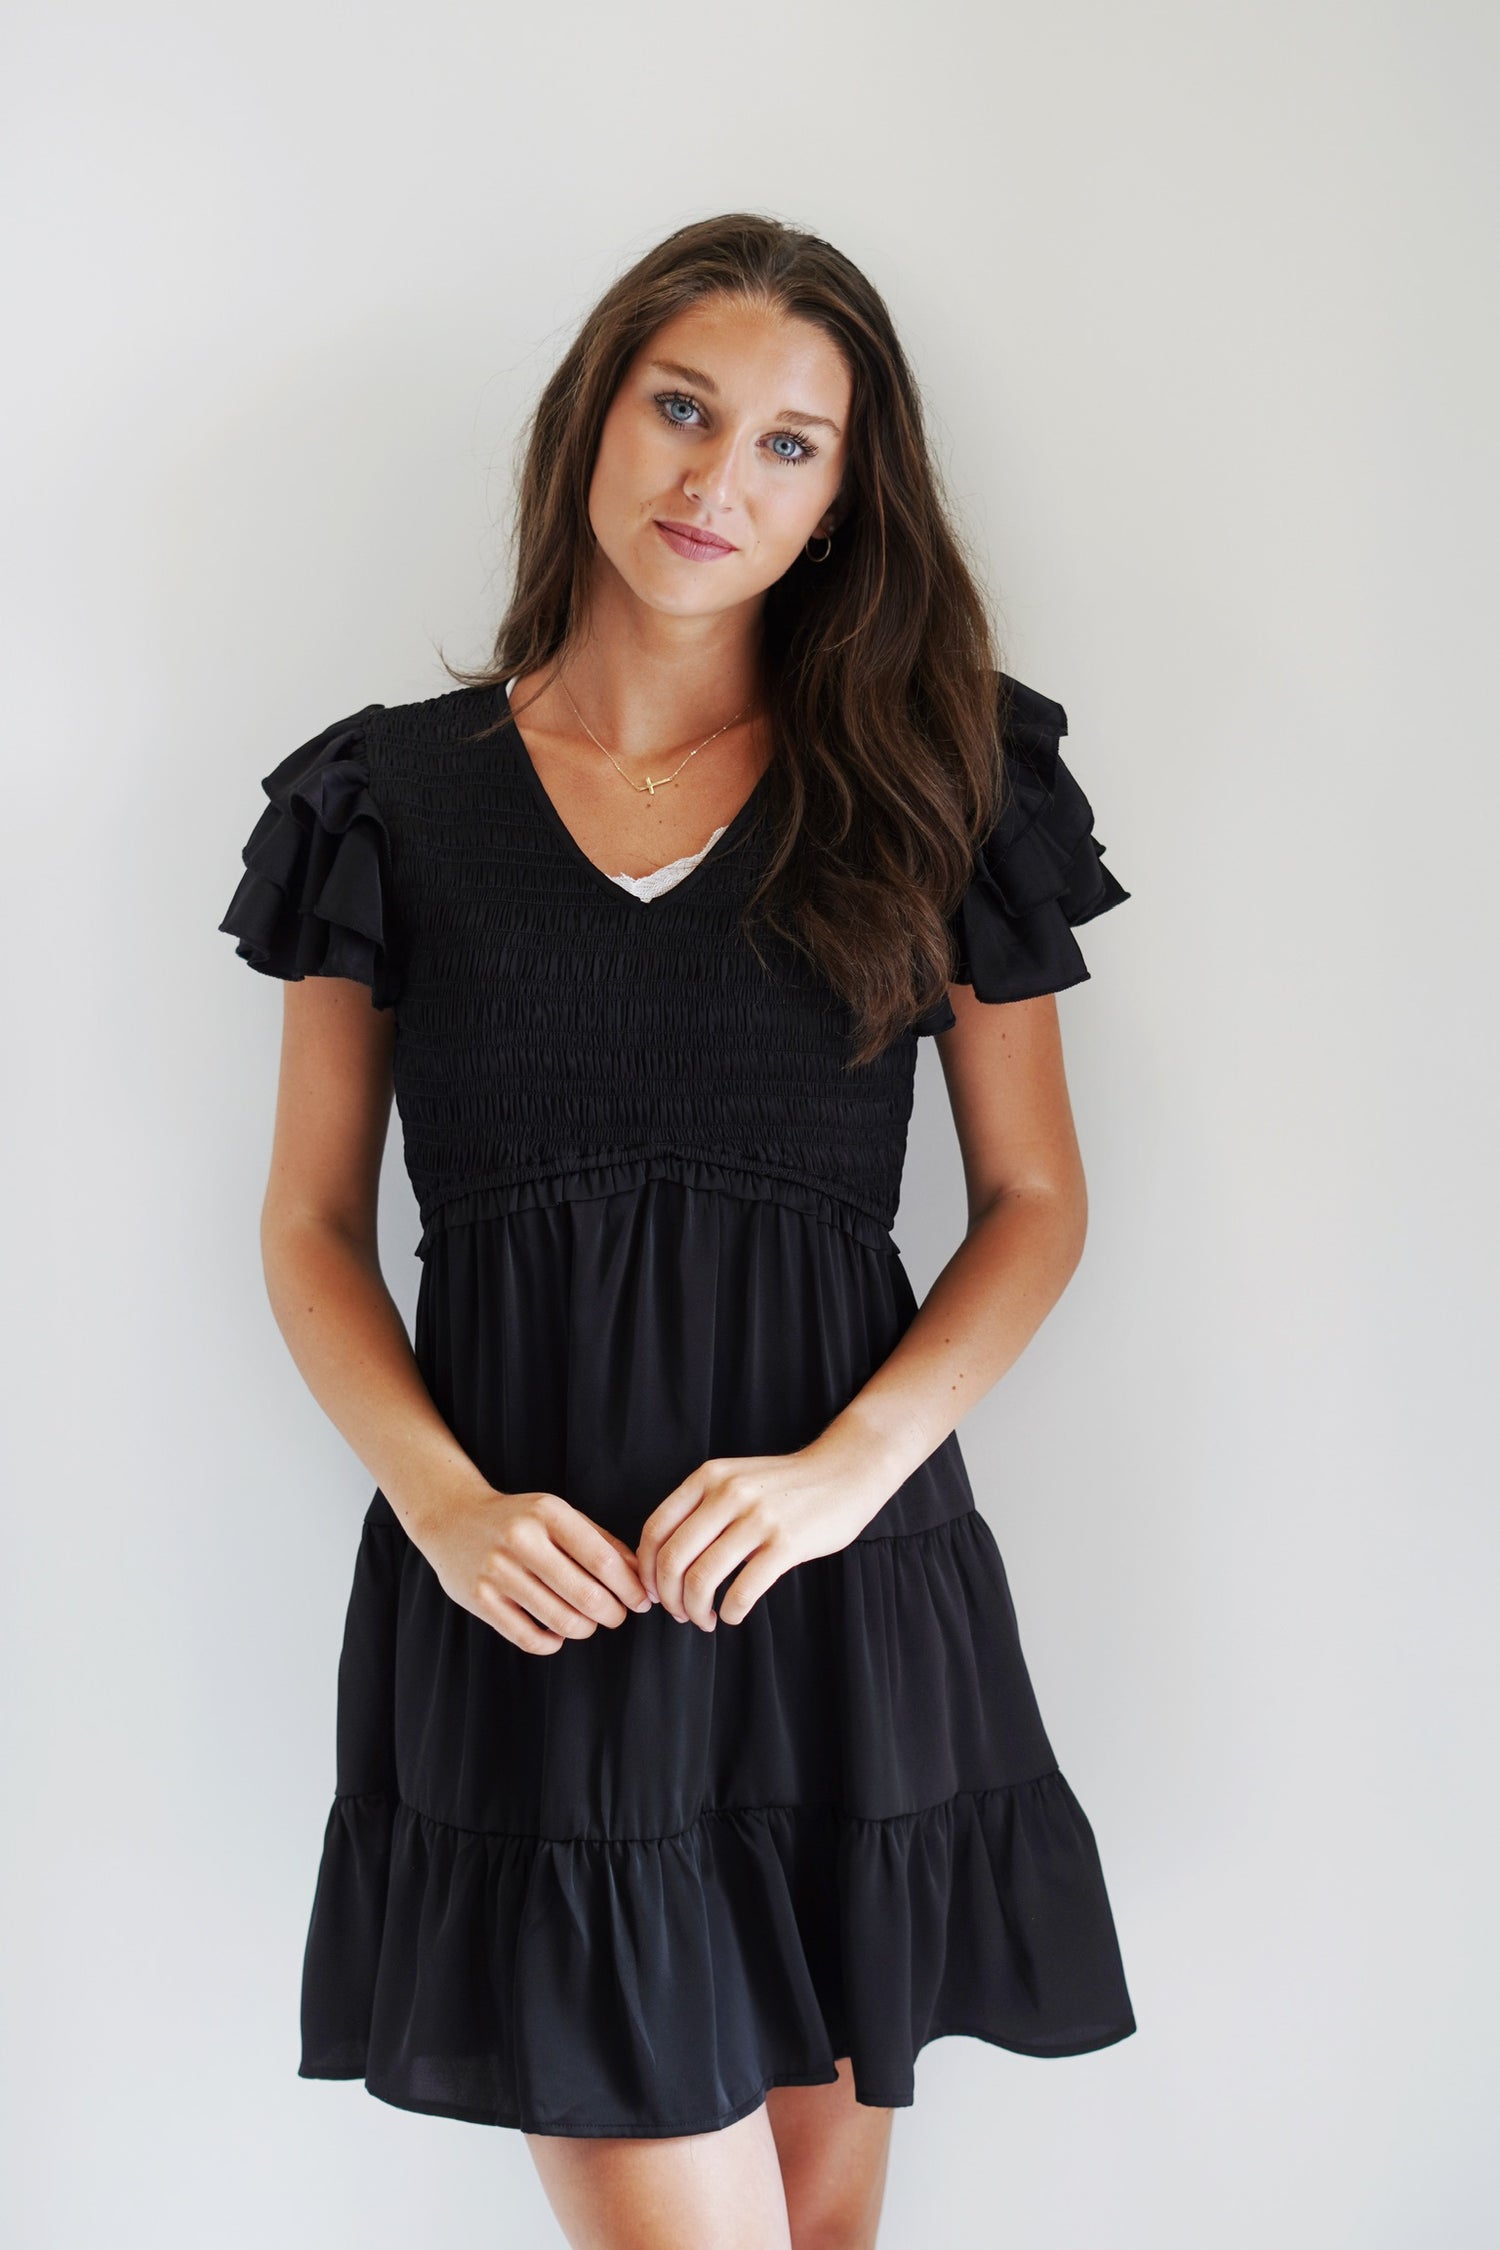 Becca Black Ruffle Sleeve Dress V Neckline Ruffle Sleeves Texture Material on top half of dress Black Satin Material, Knee length 100% Polyester Hand Wash Cold, Use Non Chlorine Bleach, Line Dry Model is wearing a size small